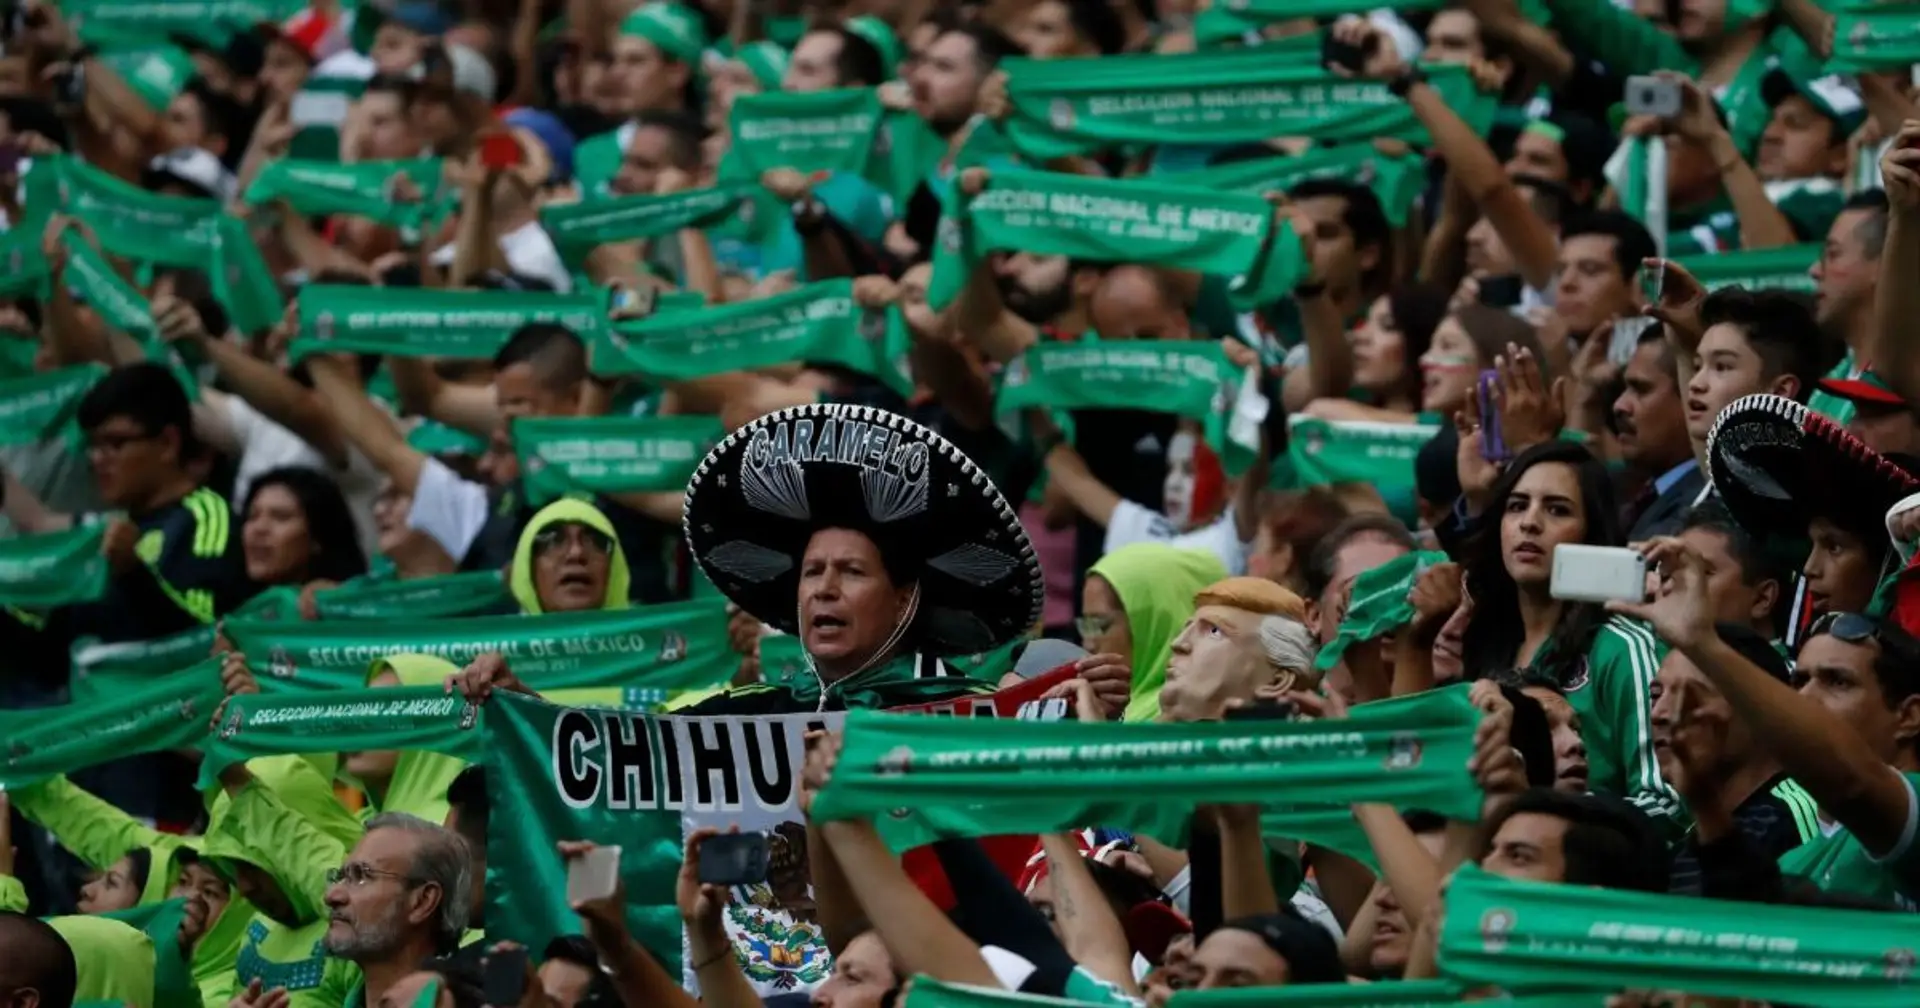 Mexico ordered to play 2 more World Cup qualifiers behind closed doors due to anti-gay chants